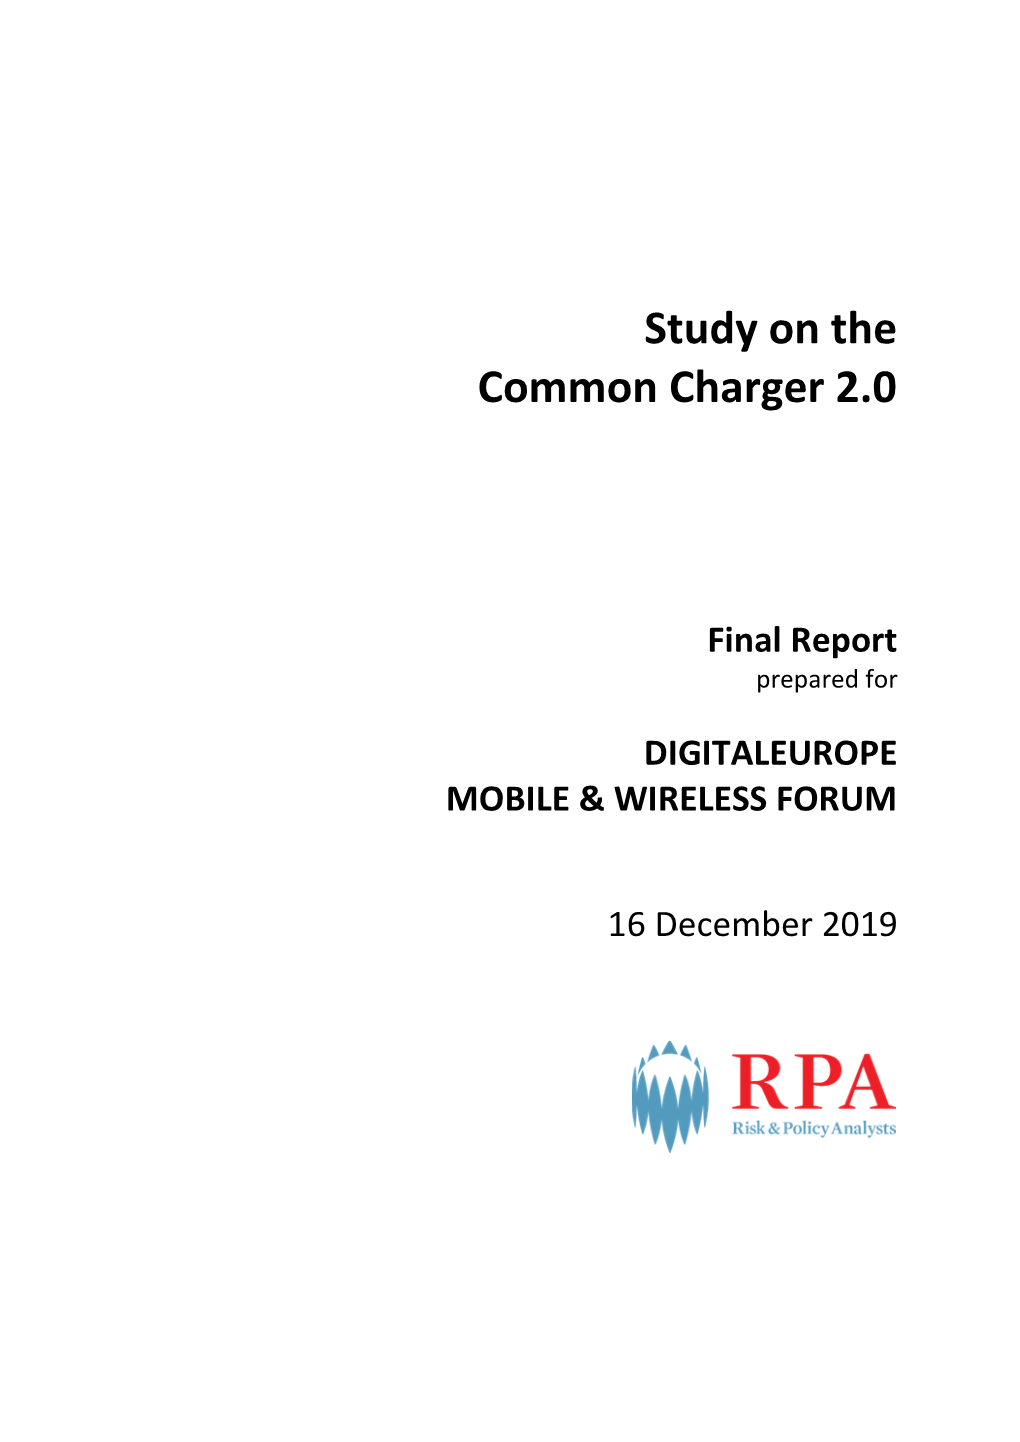 Study on the Common Charger 2.0